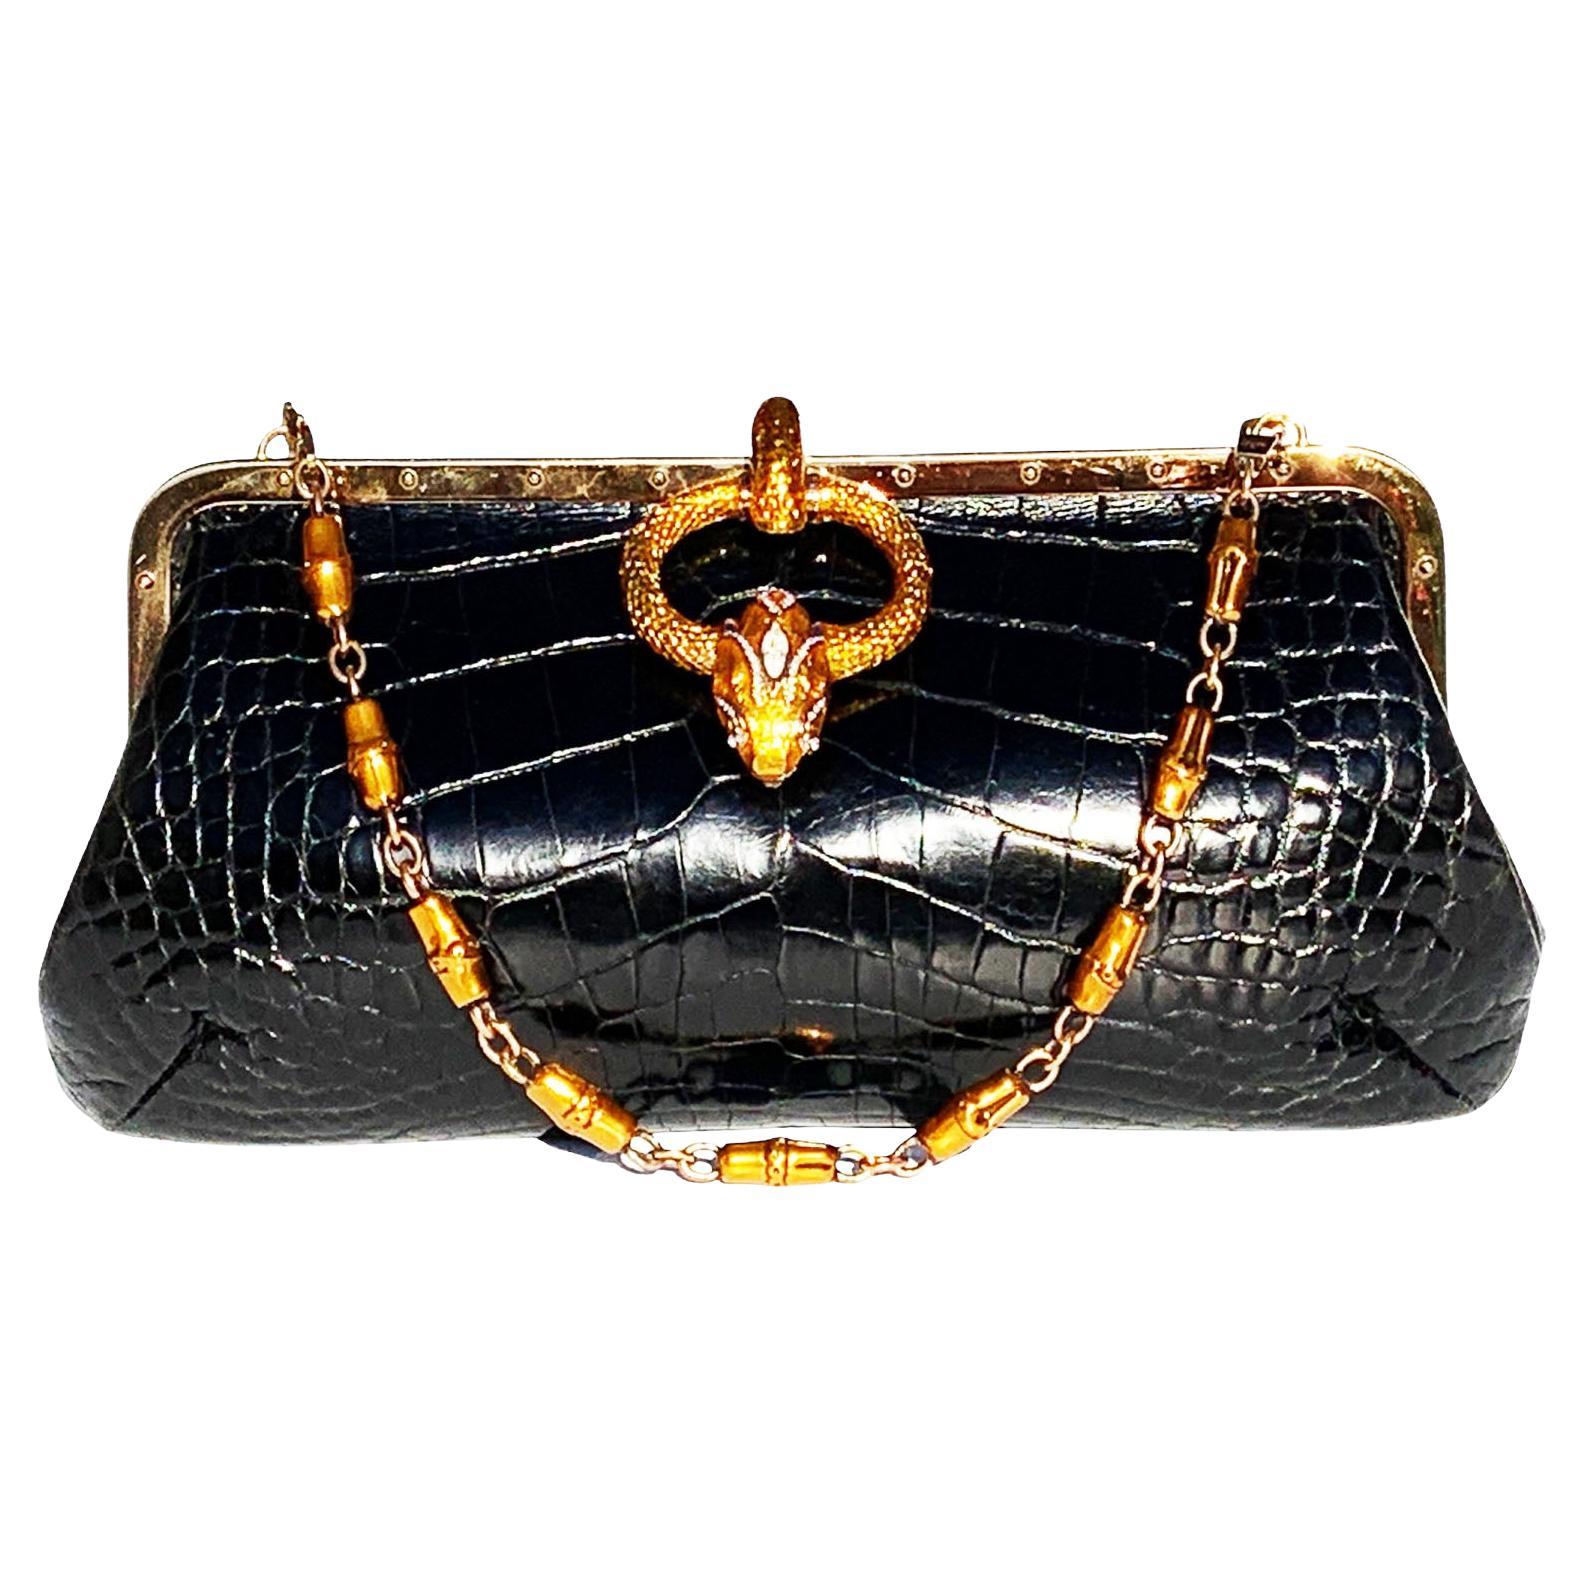 New Tom Ford for Gucci S/S 2004 Limited Edition Black Crocodile Enamel Snake Bag For Sale